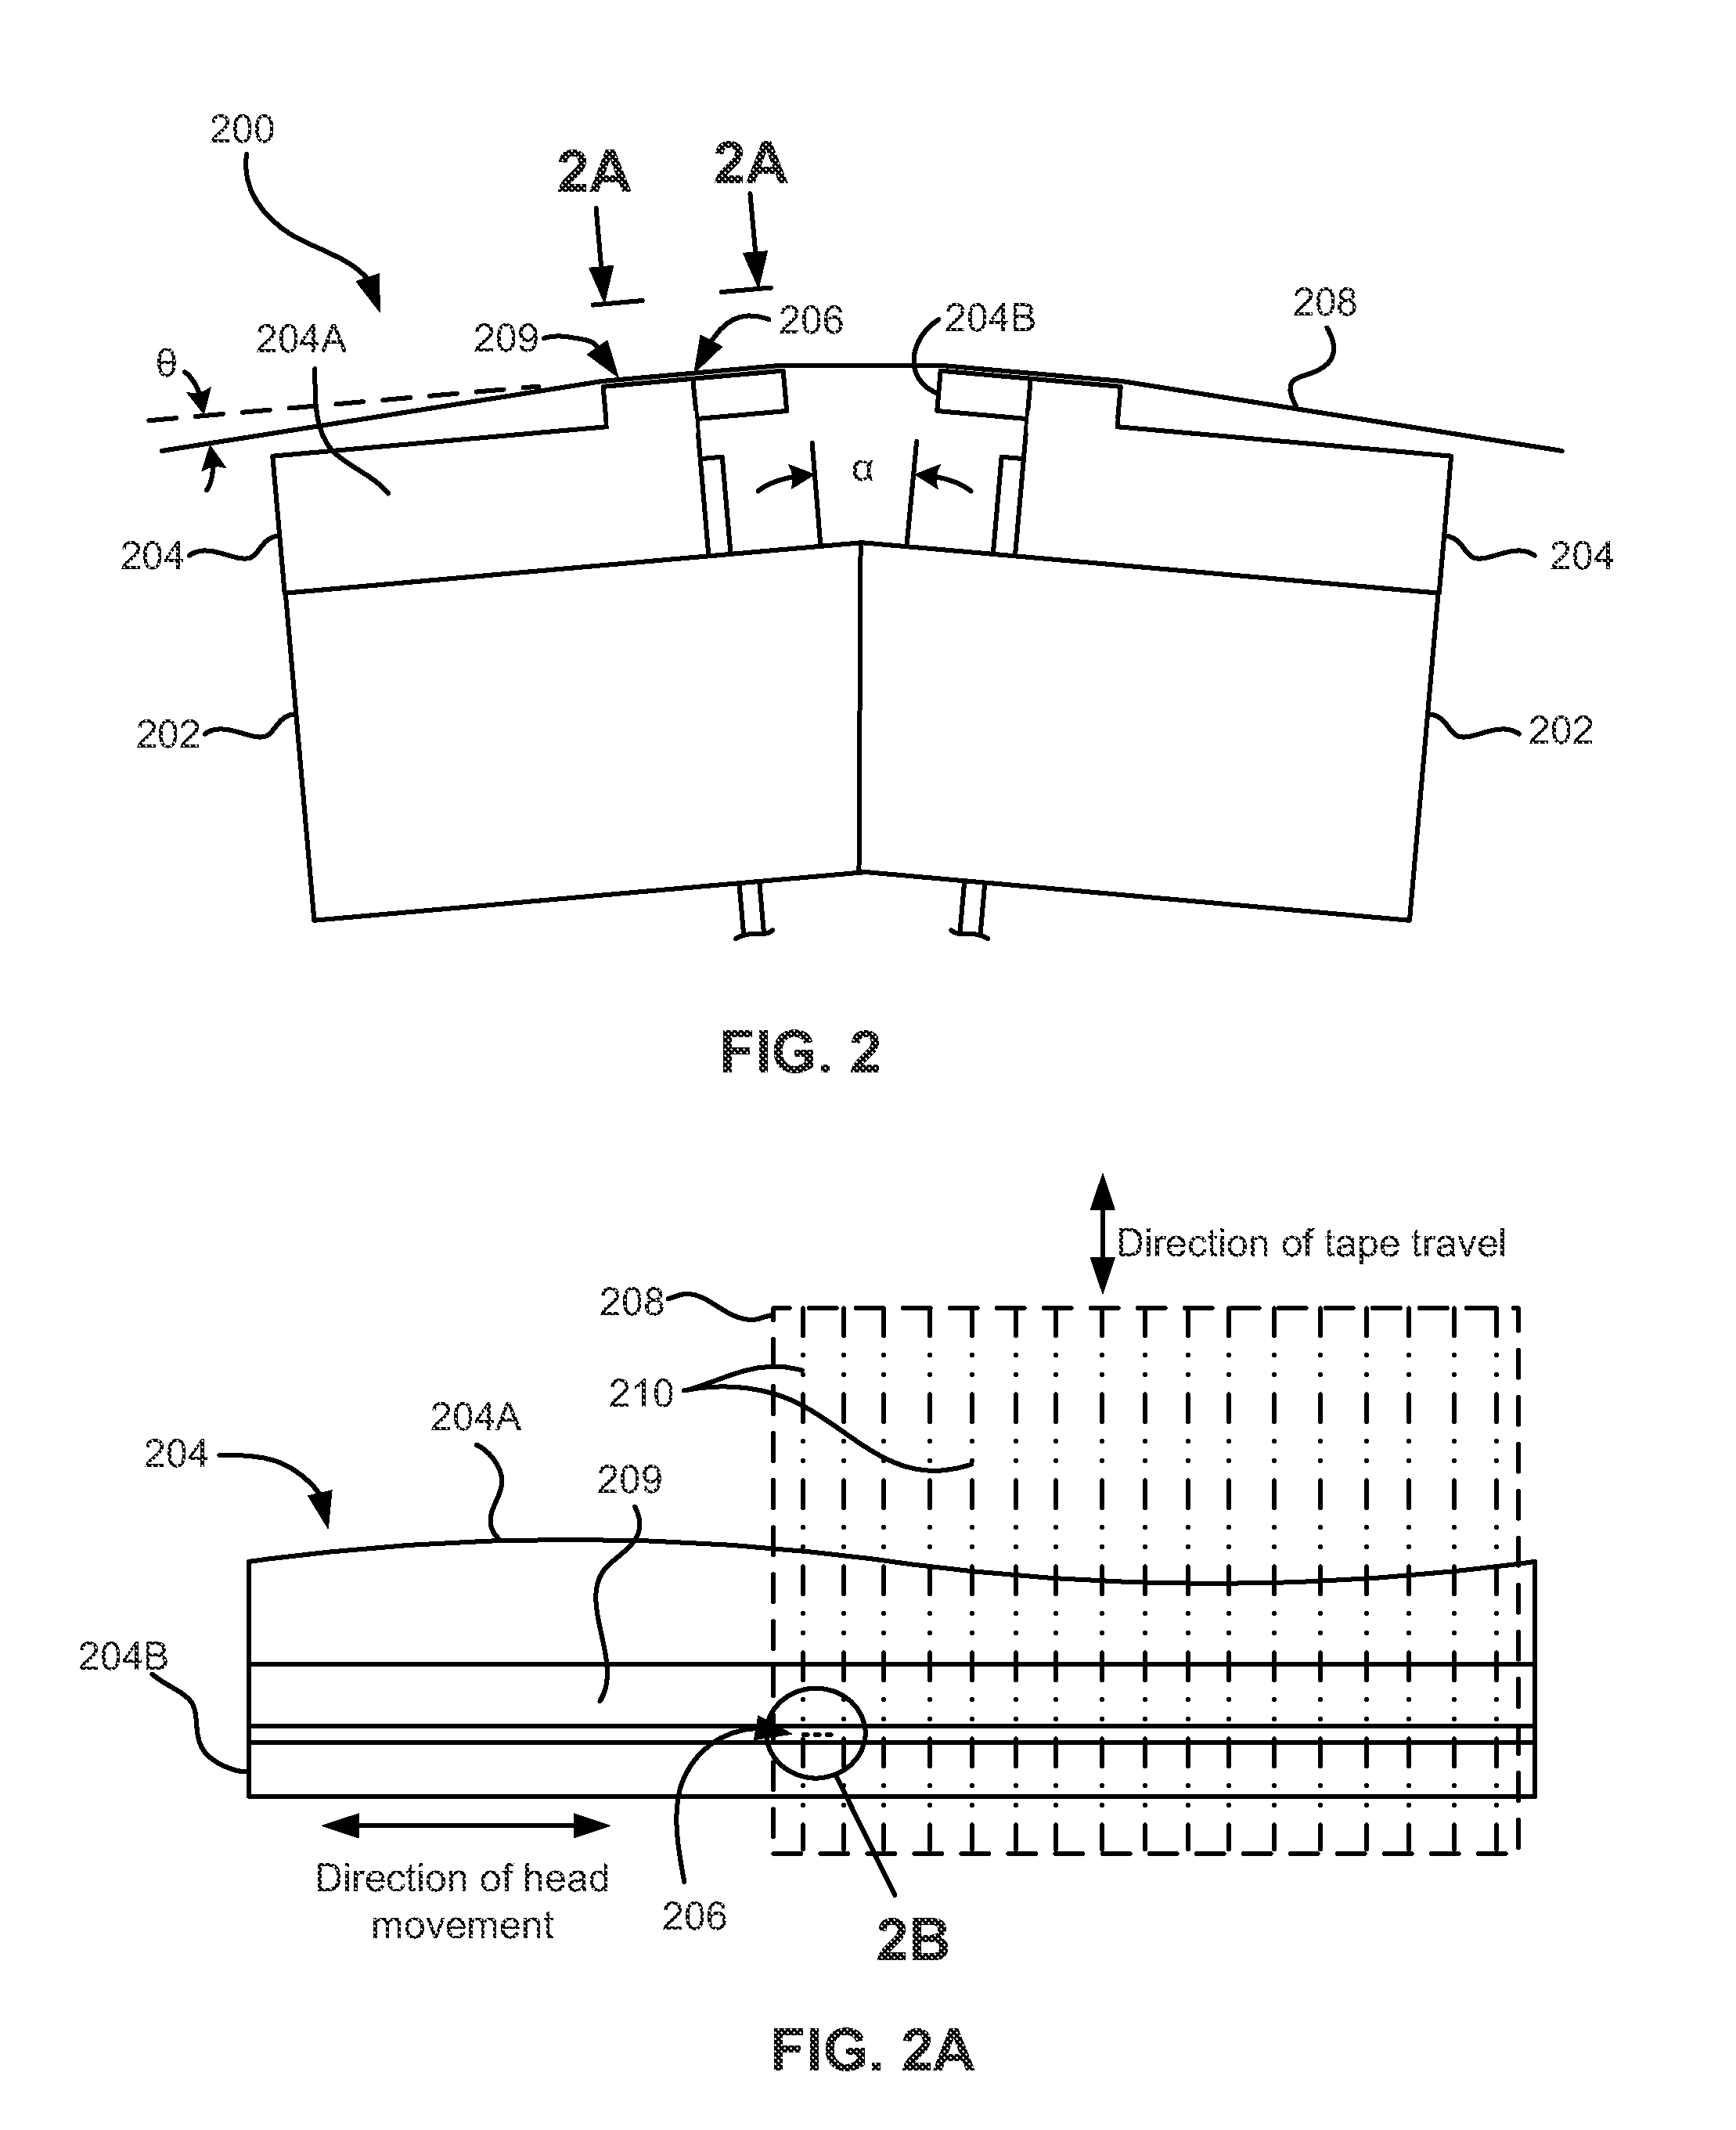 High density timing based servo format for use with tilted transducer arrays